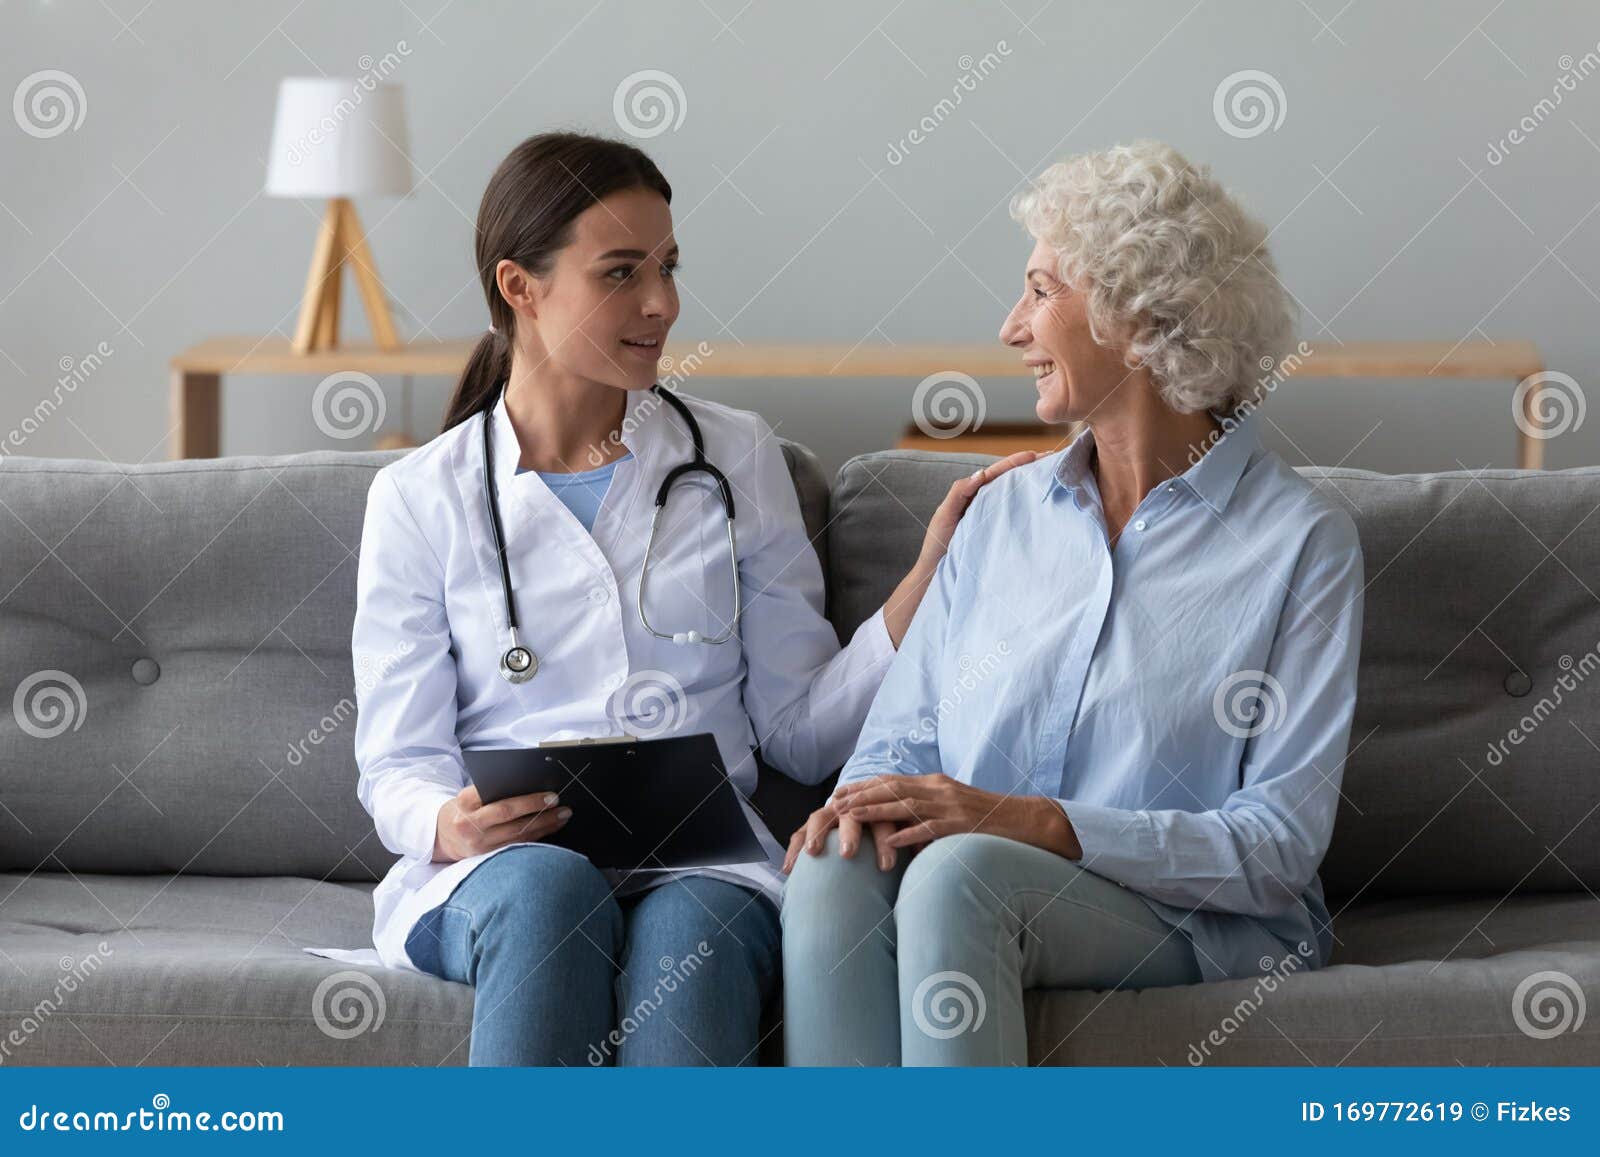 smiling doctor consulting older woman patient during visit at home